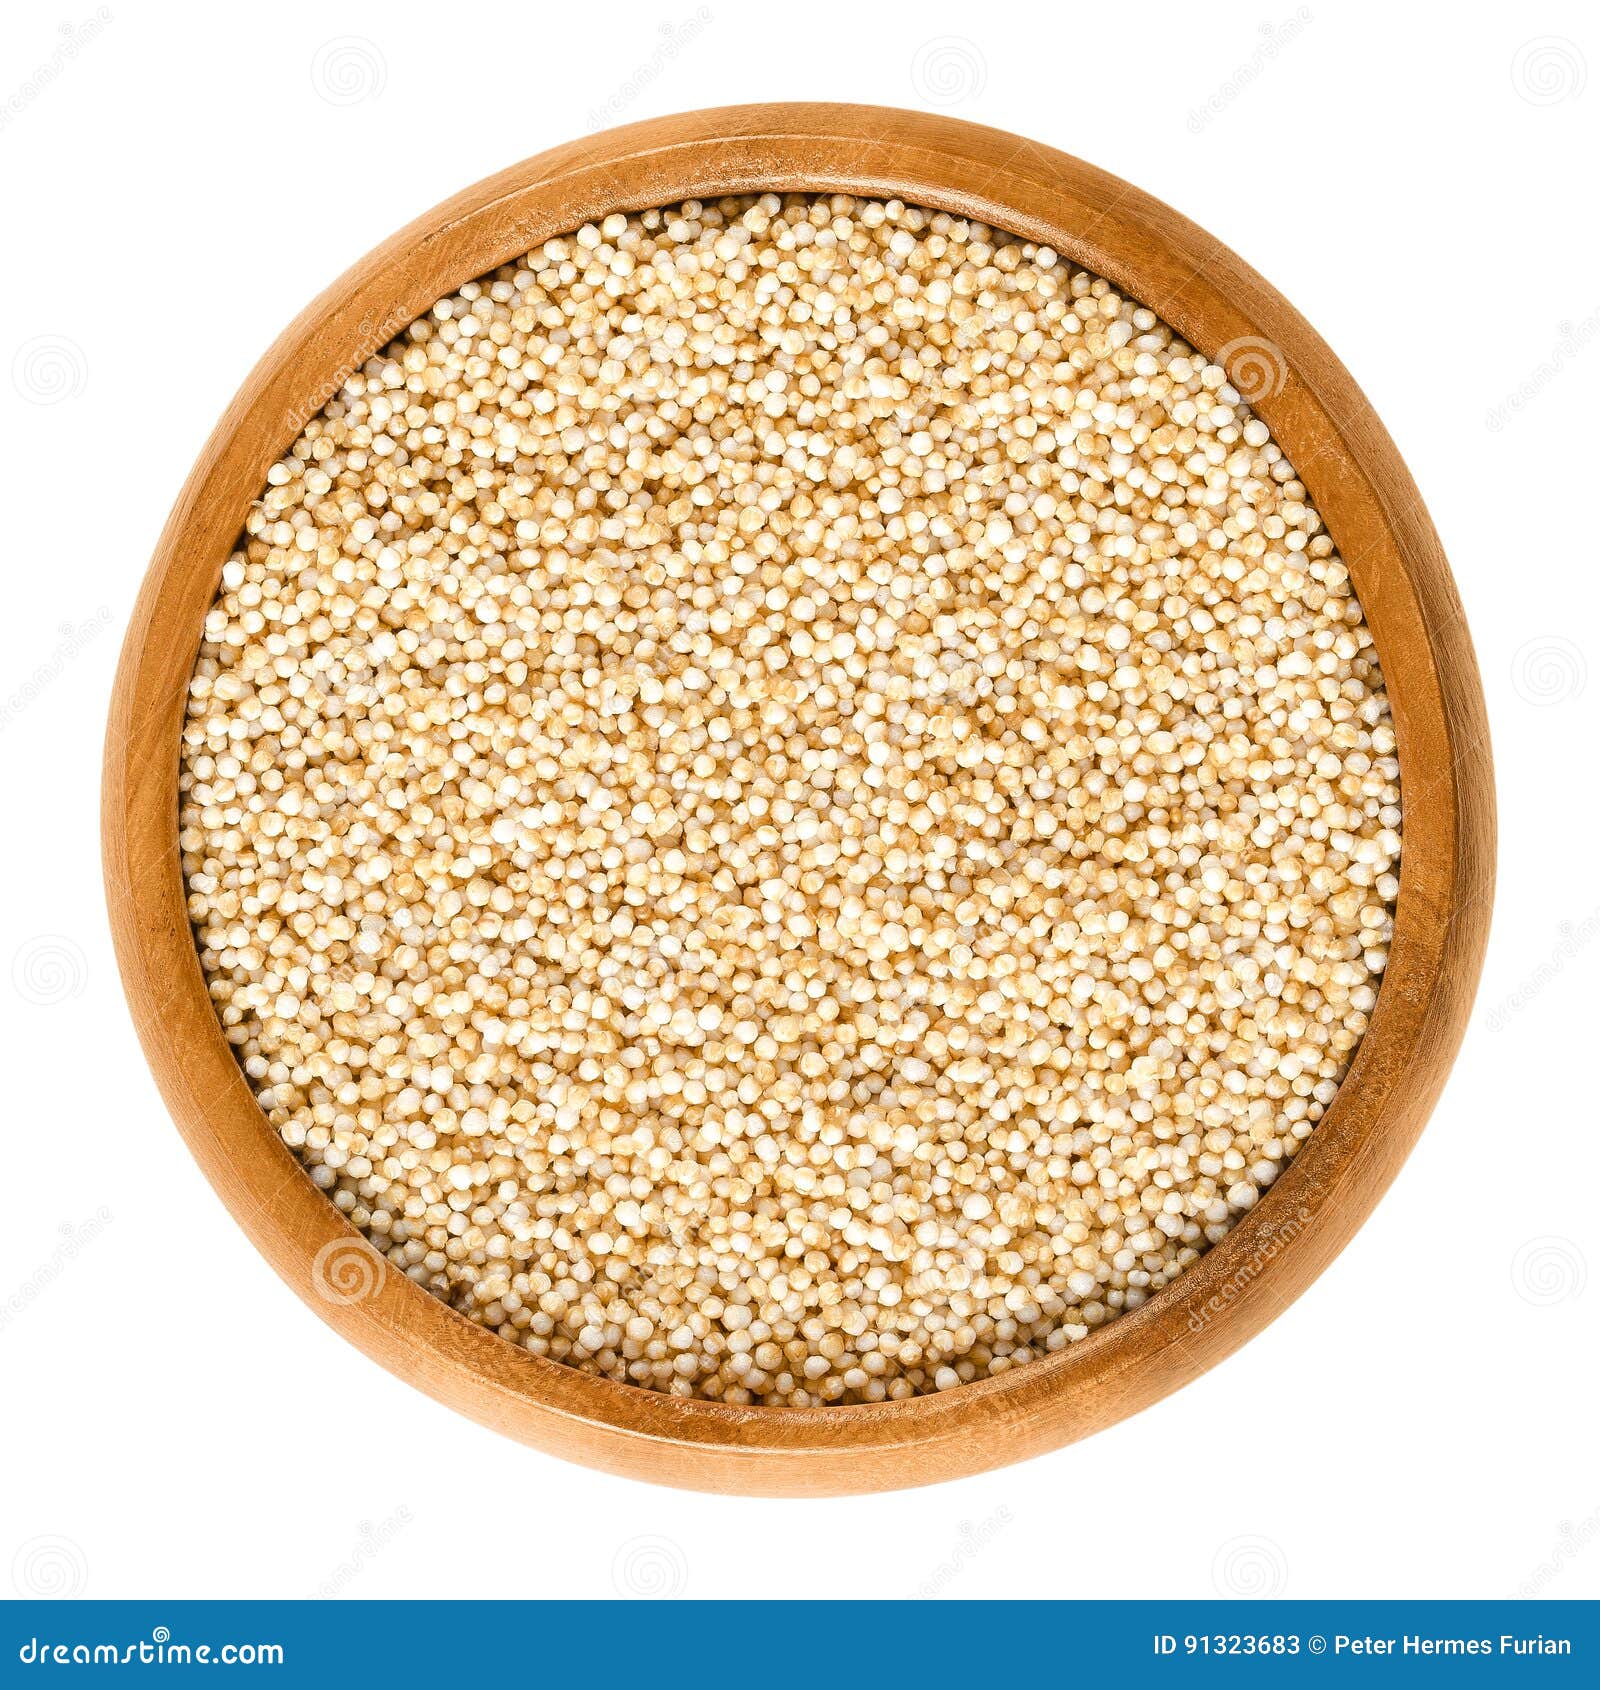 puffed amaranth in wooden bowl over white